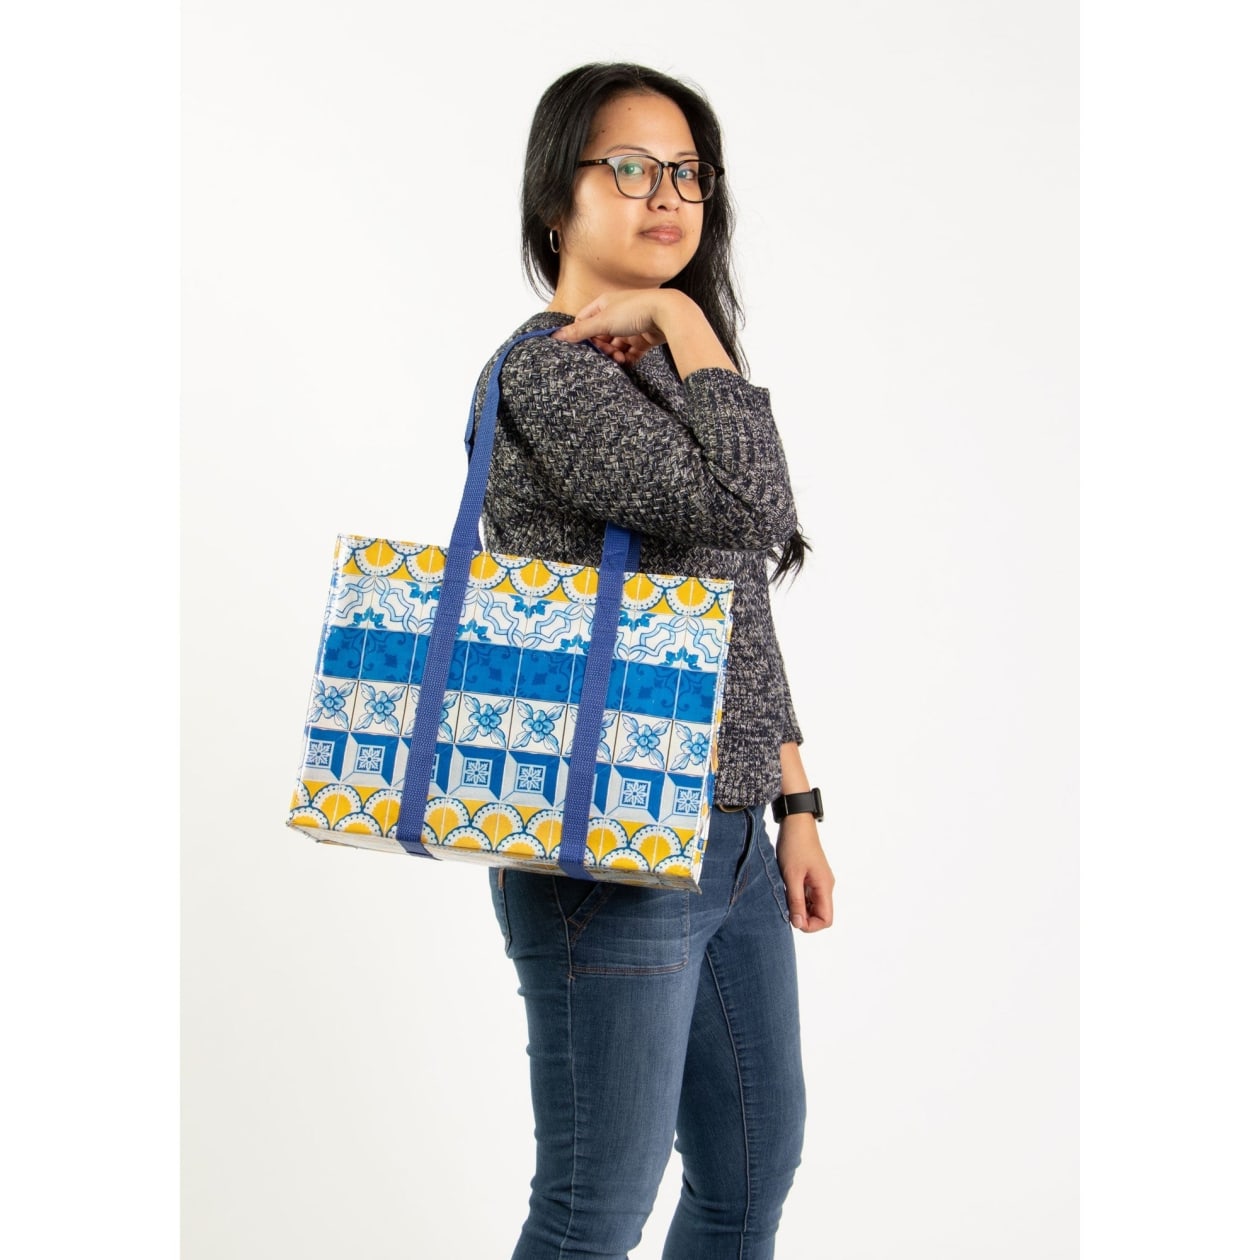 Painted Tiles Shoulder Tote Bag in Blue and Yellow | 11" x 15" | BlueQ at GetBullish